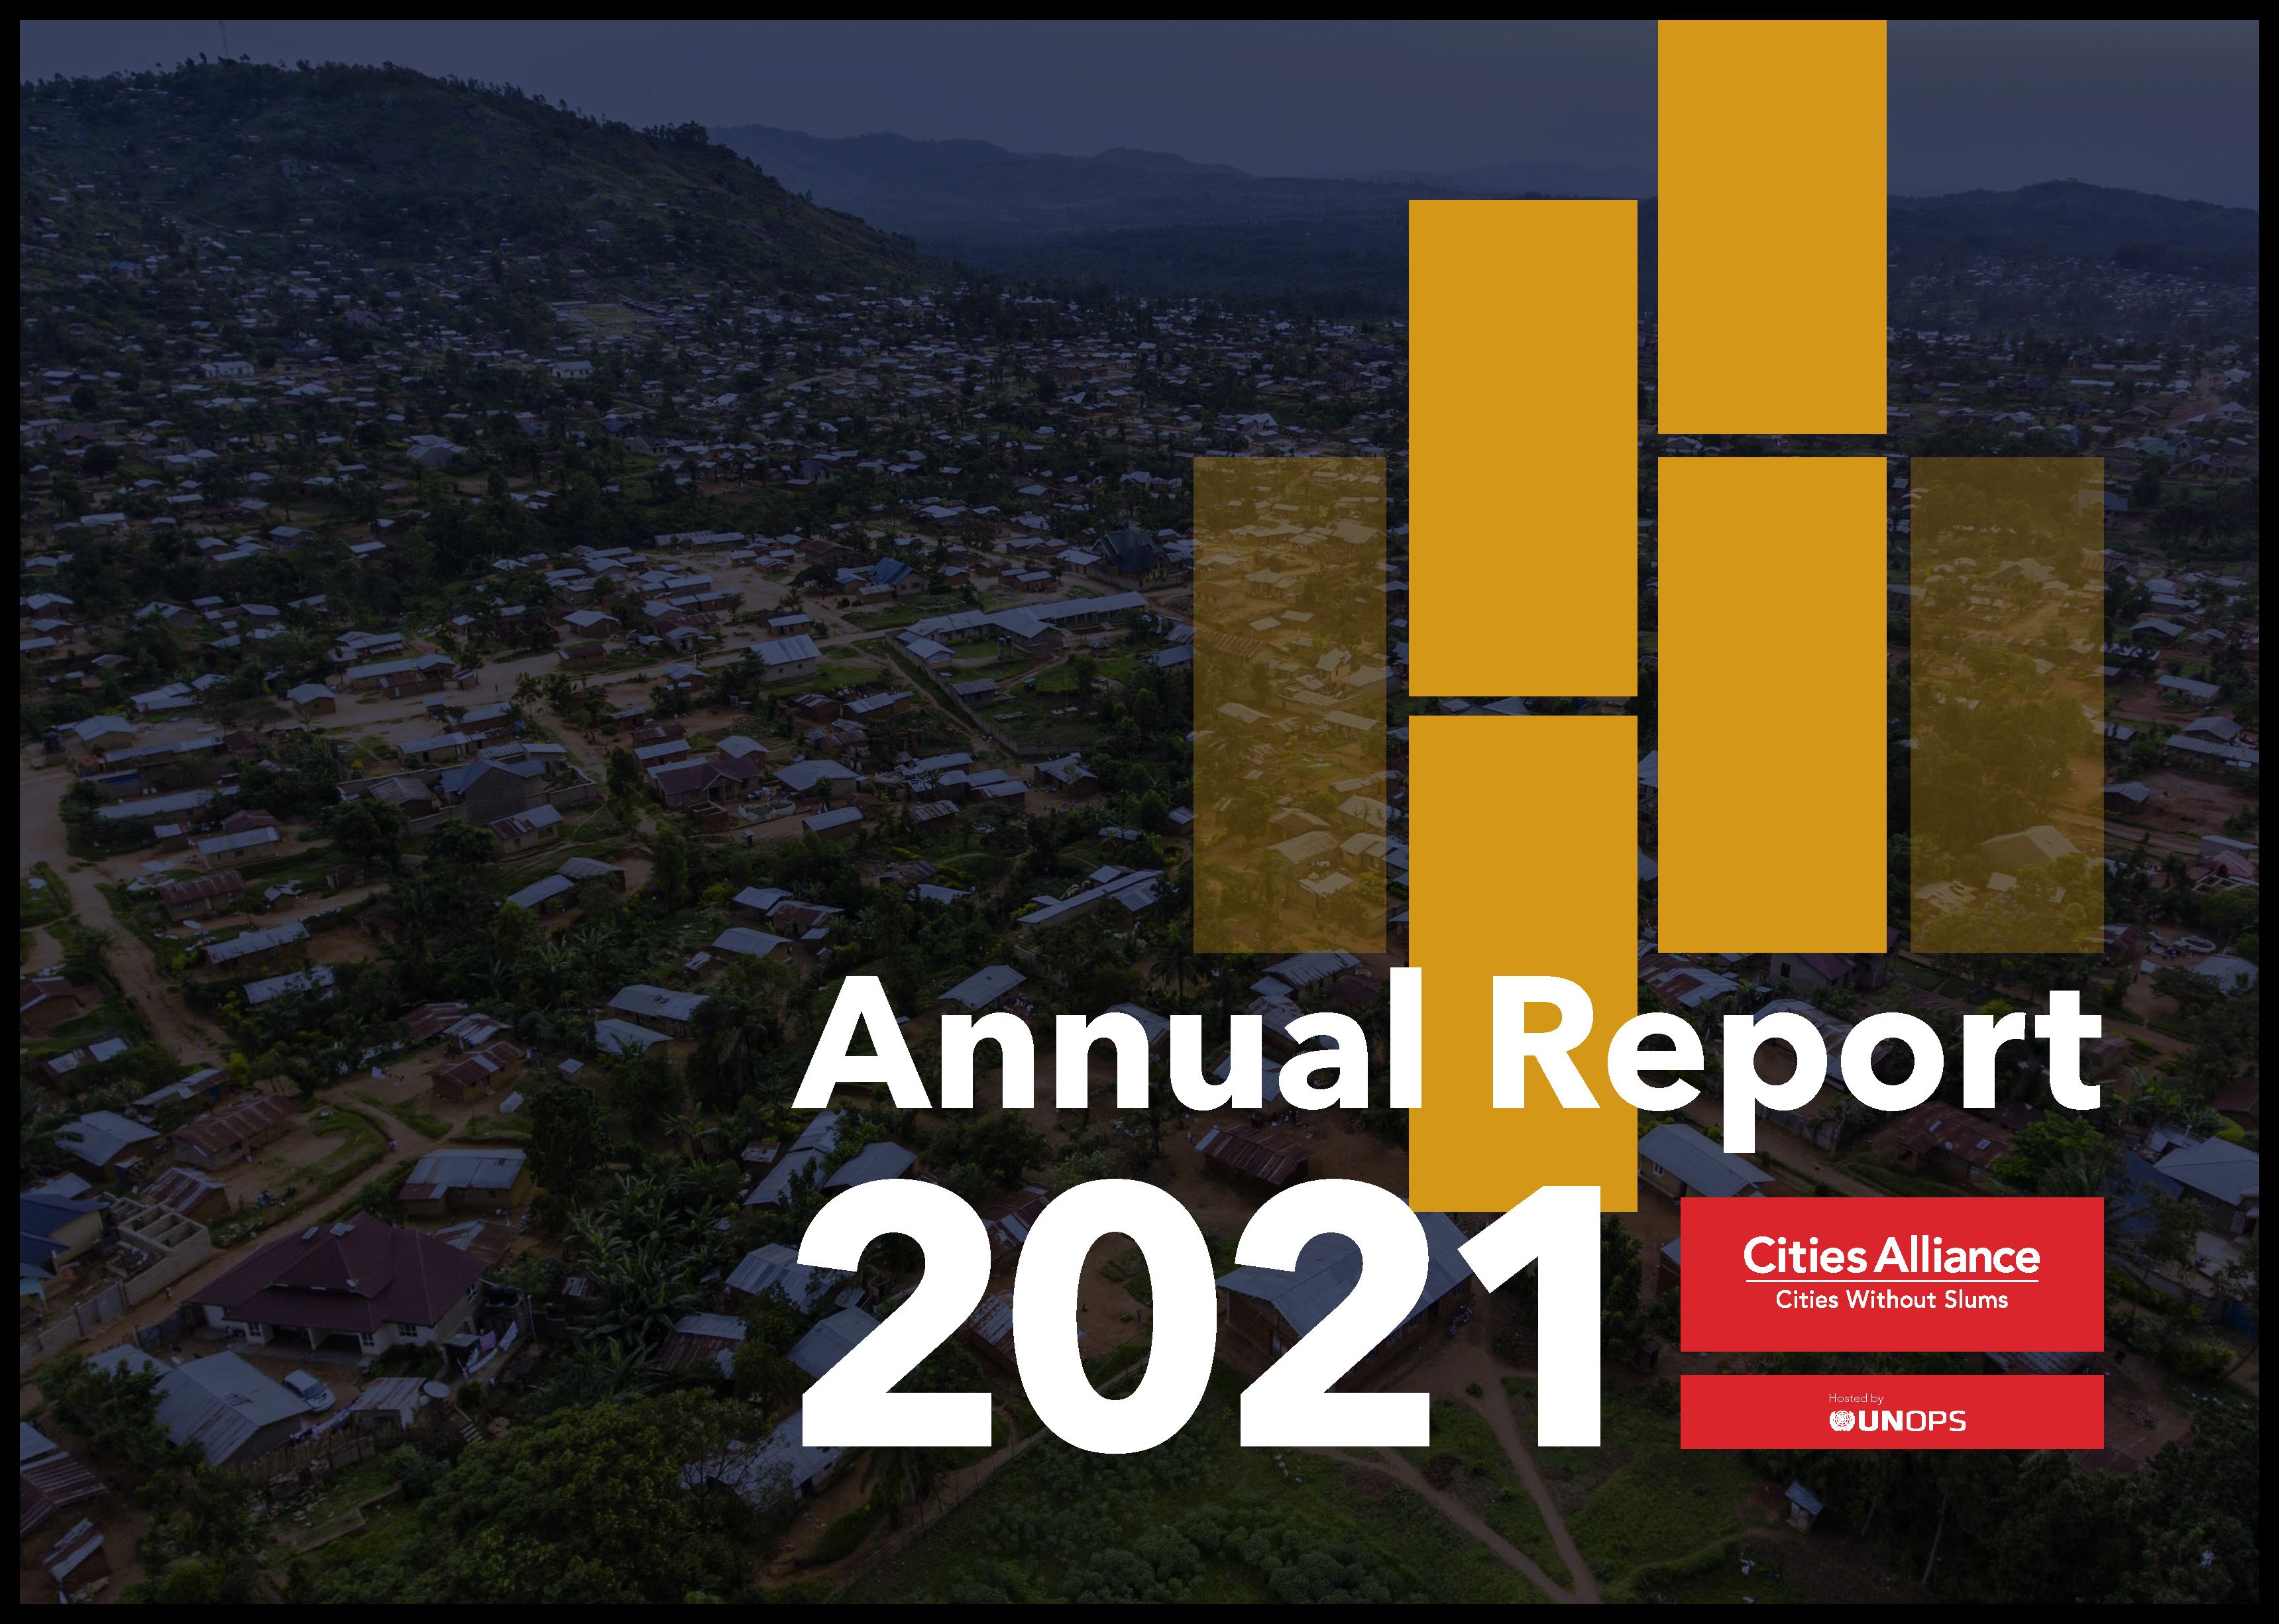 Cities Alliance Annual Report 2021